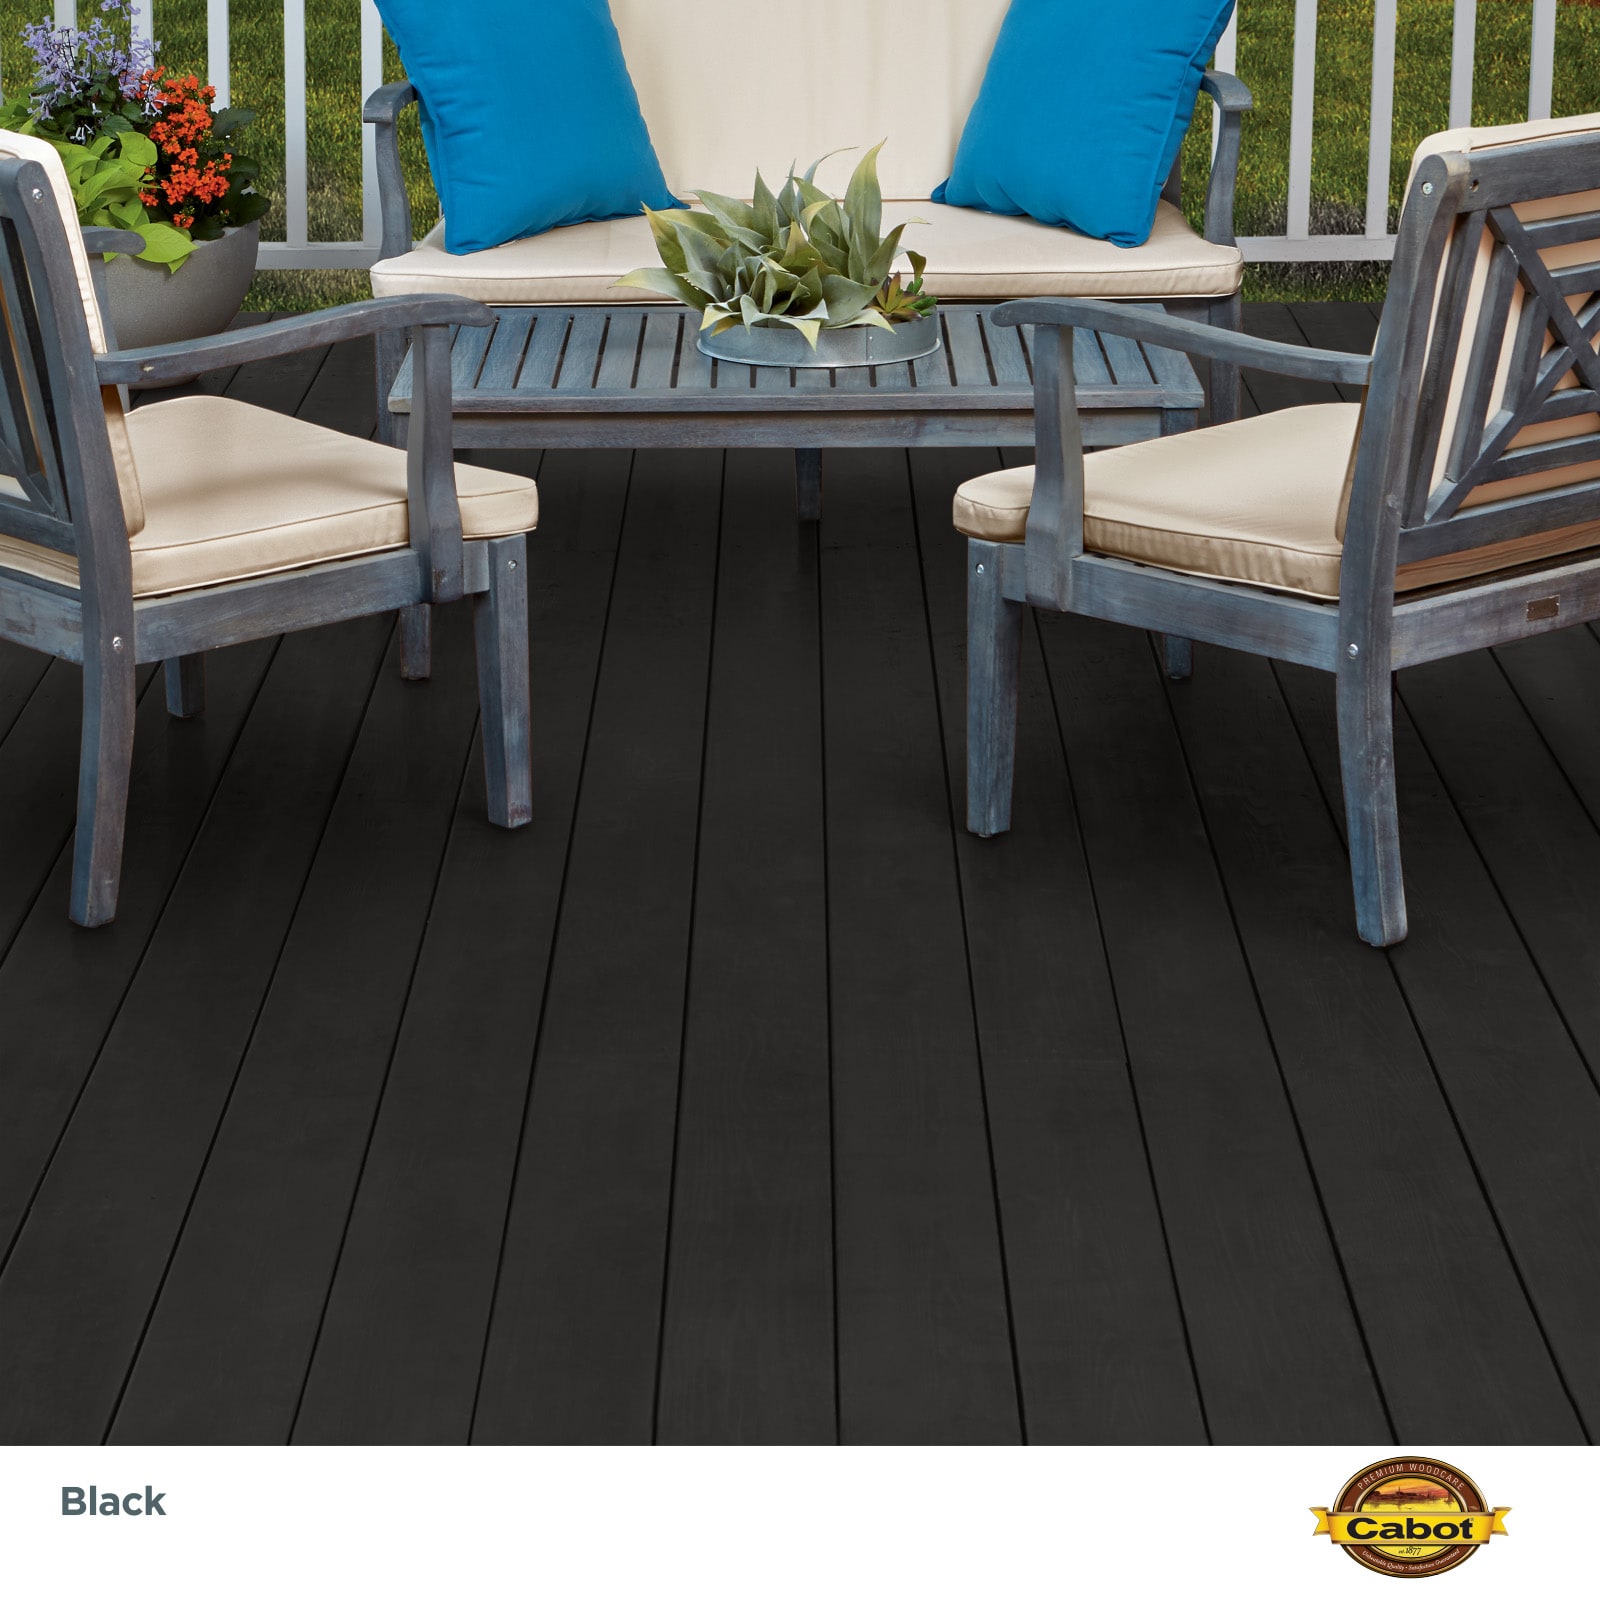 Cabot Black Solid Exterior Stains (1-Gallon) Wood in the Stain and Sealer at Exterior department